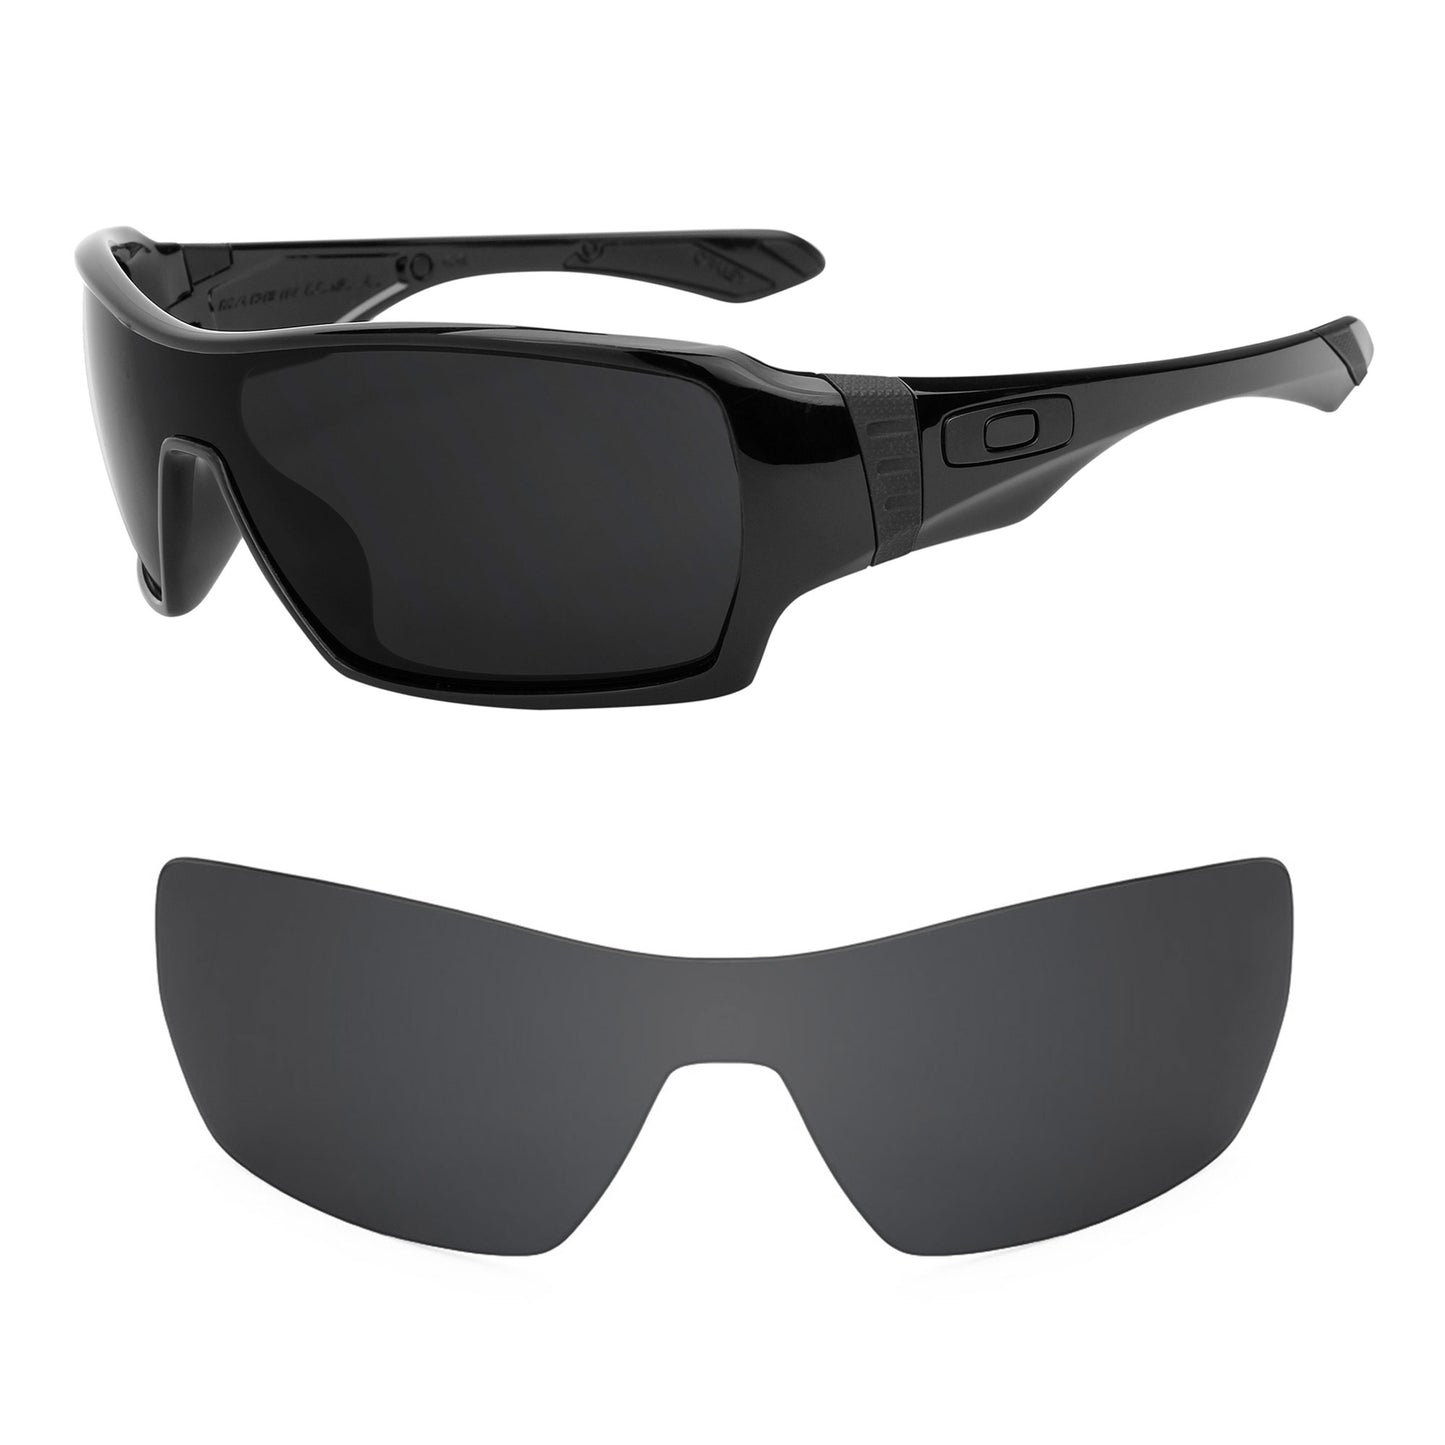 Oakley Offshoot sunglasses with replacement lenses